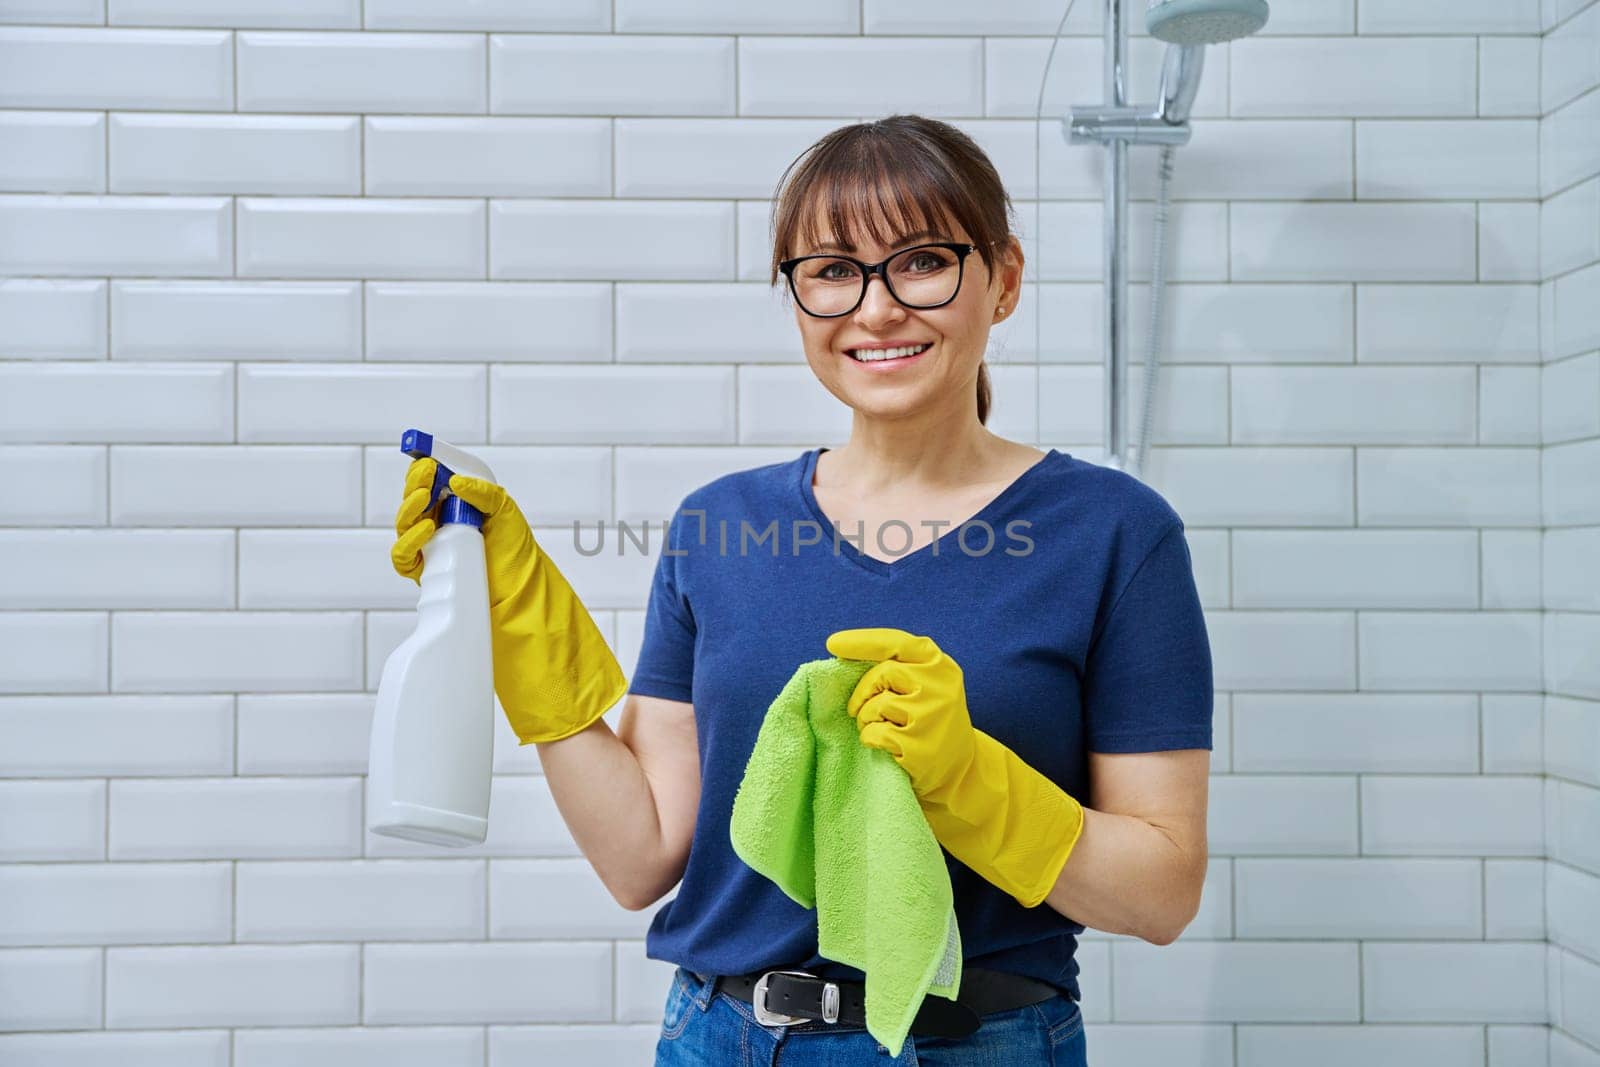 Middle-aged woman in gloves with detergent spray washcloth doing cleaning in bathroom, smiling looking at camera. Routine house cleaning, home hygiene, housecleaning service, housekeeping, housework